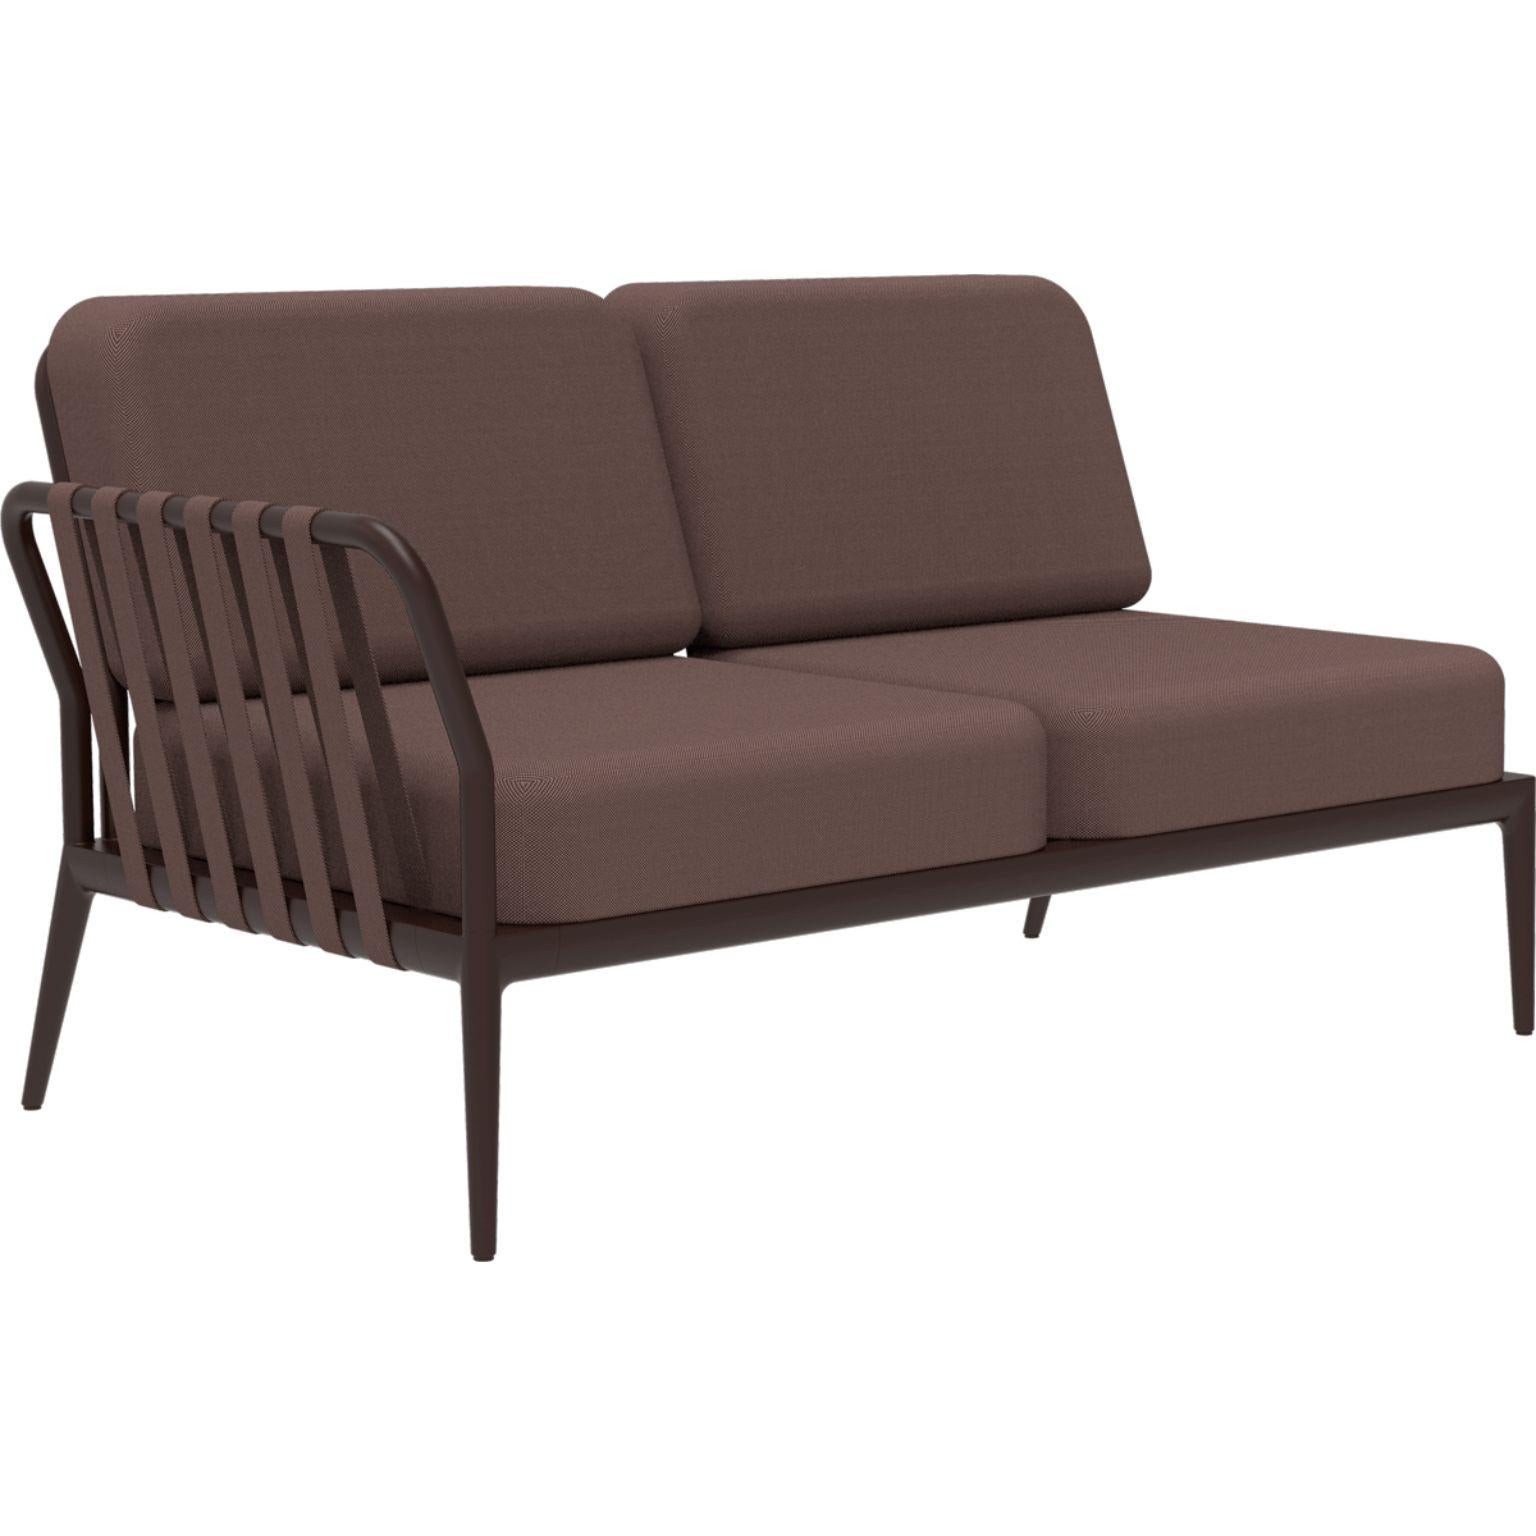 Ribbons chocolate double right modular sofa by Mowee
Dimensions: D83 x W148 x H81 cm (seat height 42 cm).
Material: Aluminium and upholstery.
Weight: 29 kg
Also available in different colors and finishes.

An unmistakable collection for its